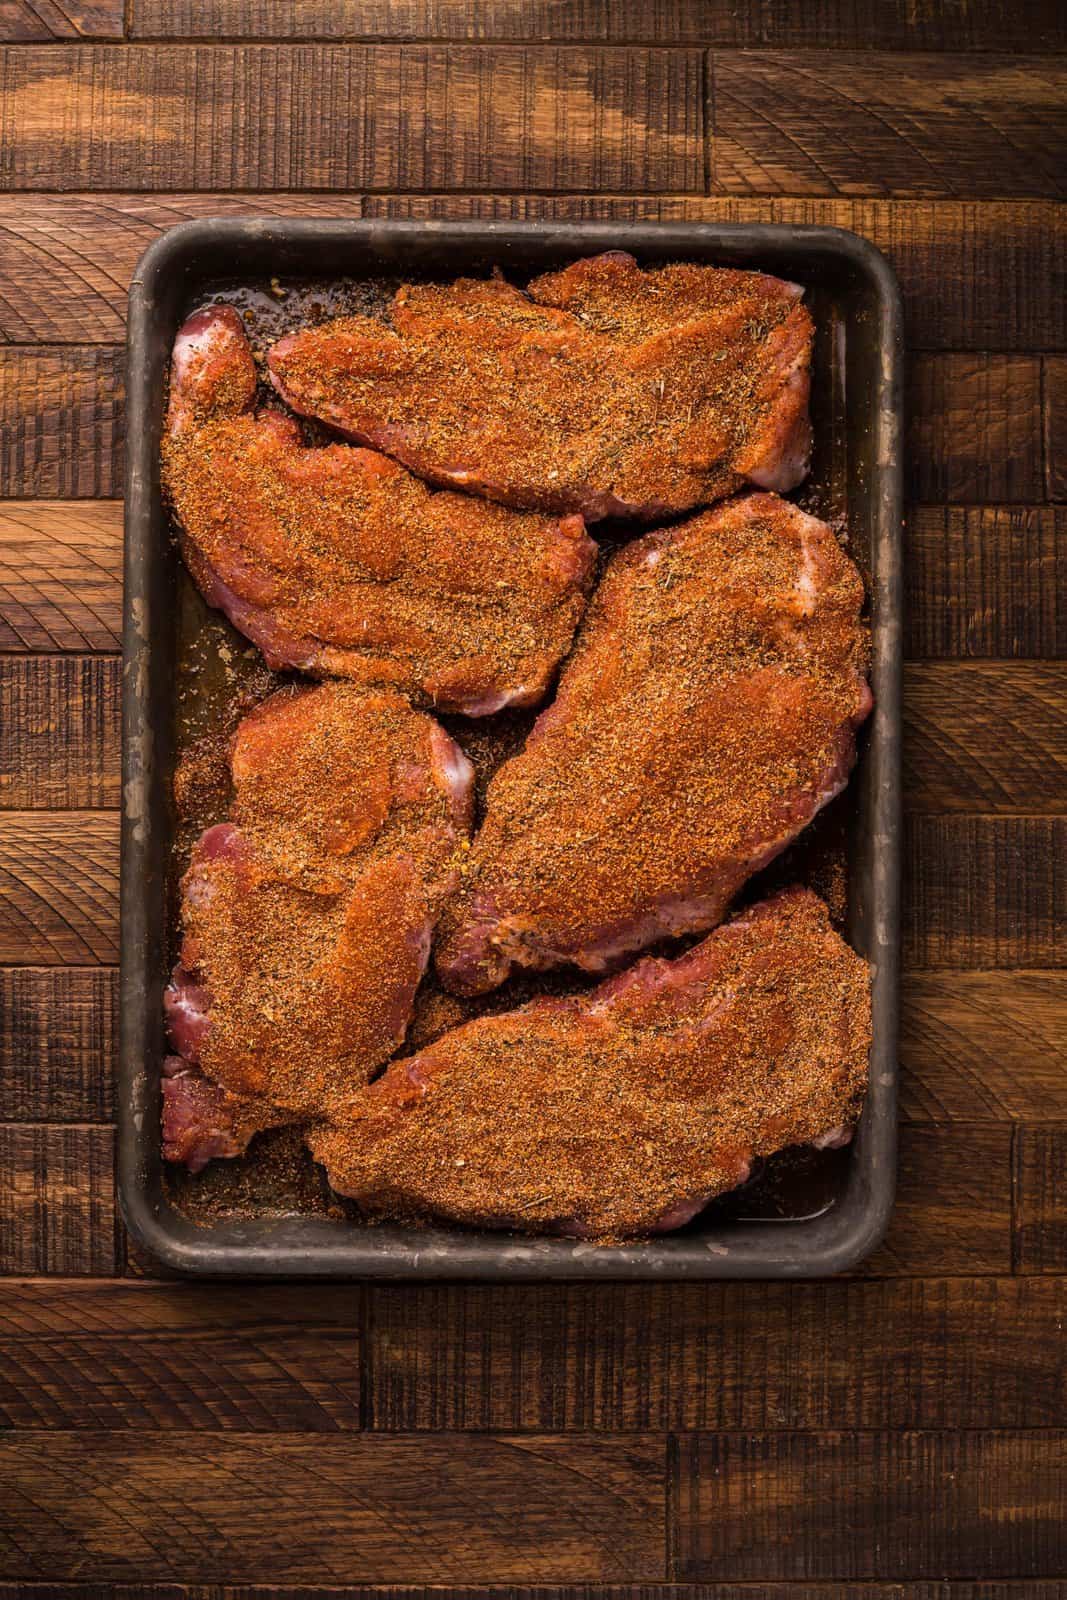 Pork Steaks rubbed with dry rub.